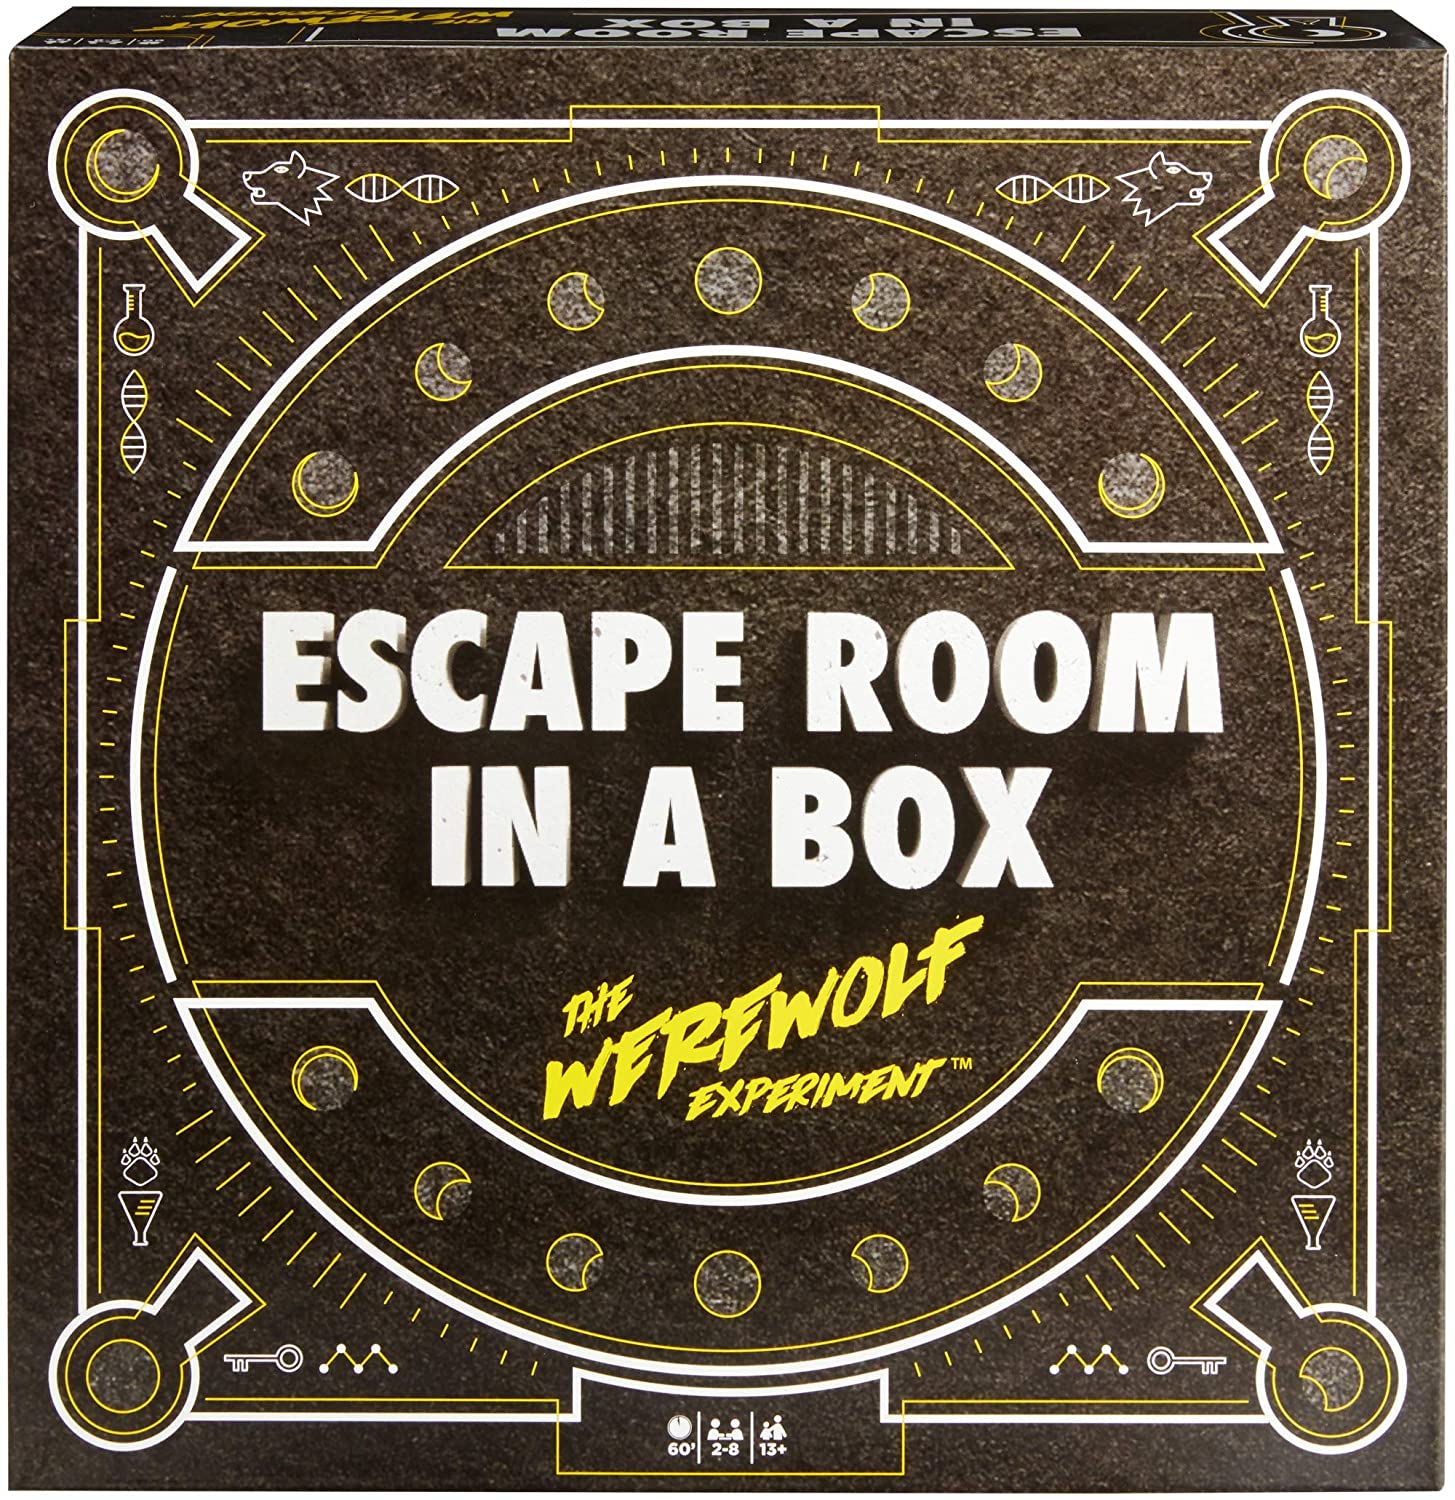 Rental - Escape Room in a Box - The Werewolf Experiment